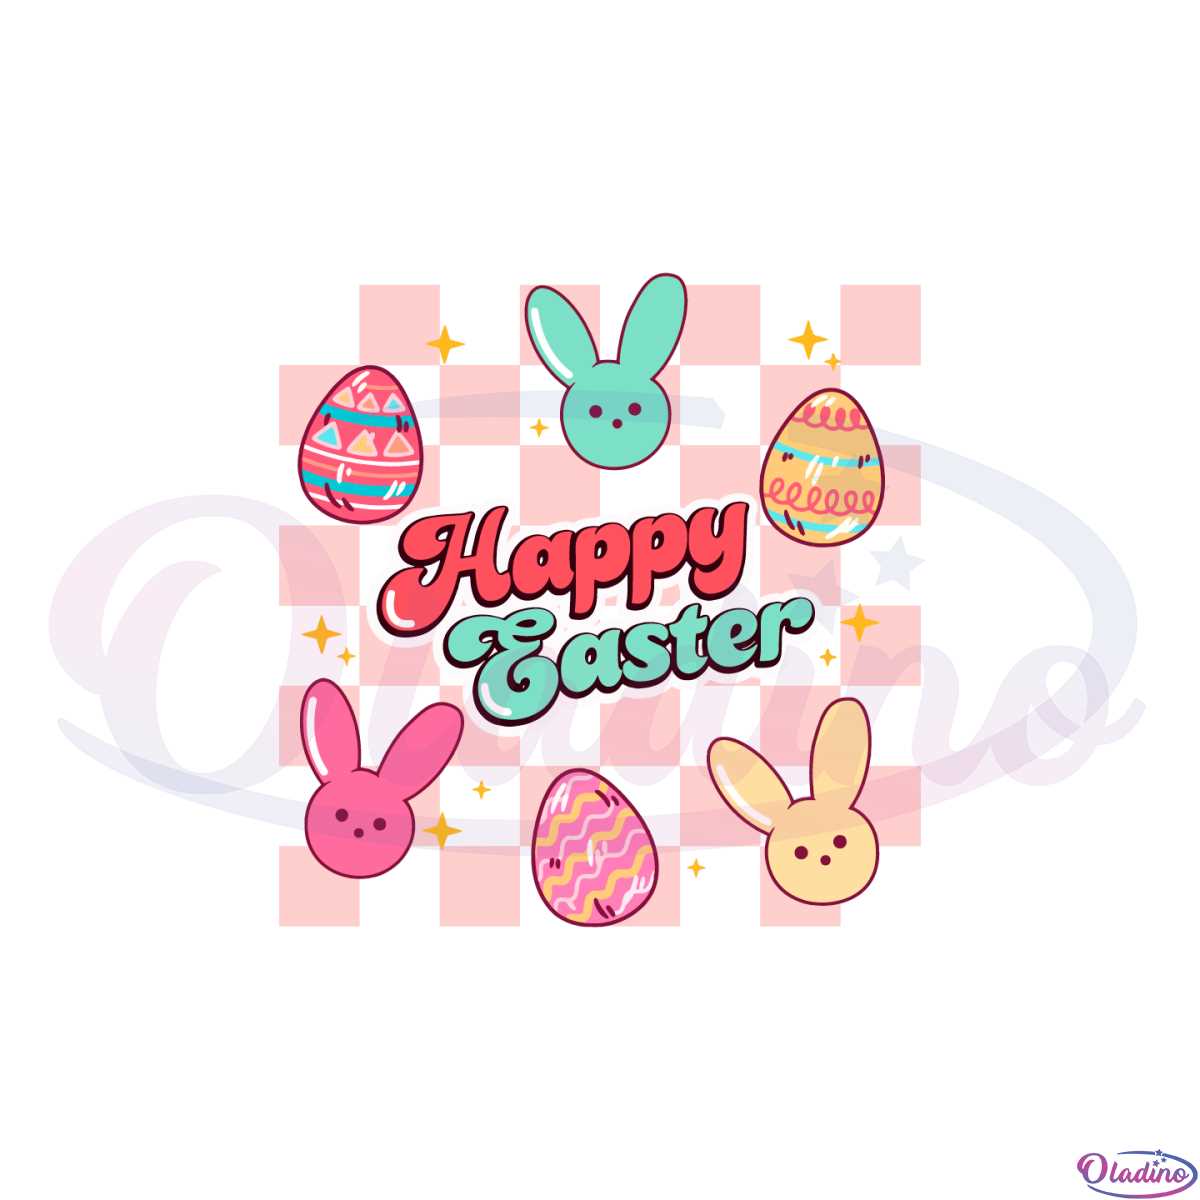 happy-easter-easter-egg-bunny-svg-files-silhouette-diy-craft